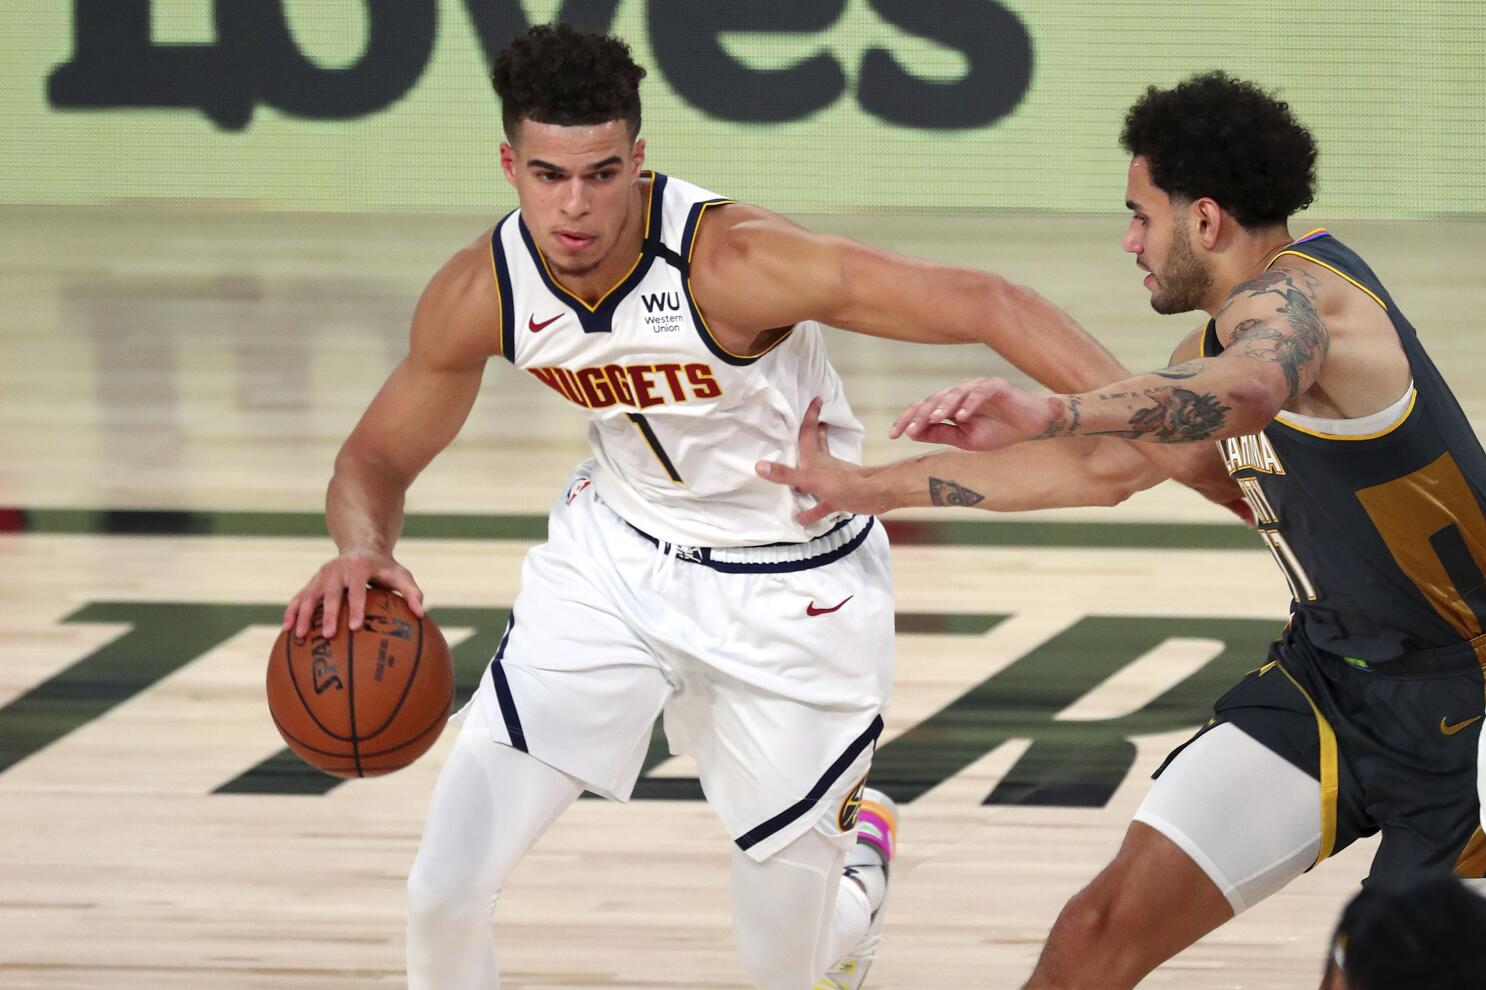 Nuggets small forward Michael Porter Jr. out with back injury